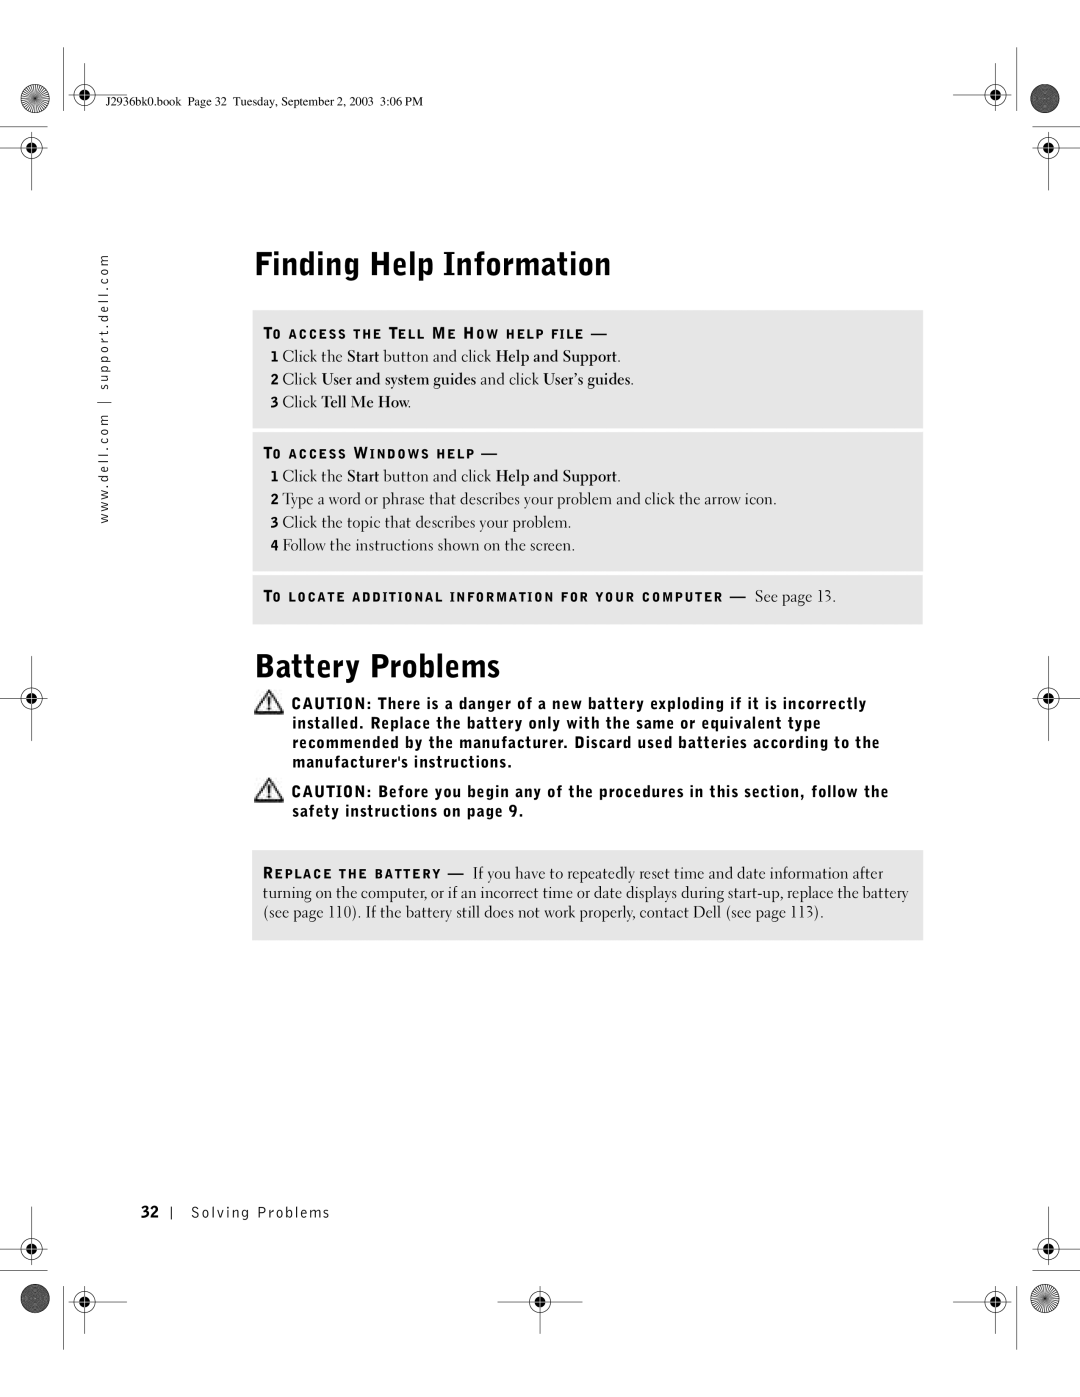 Dell J2936 manual Finding Help Information, Battery Problems 